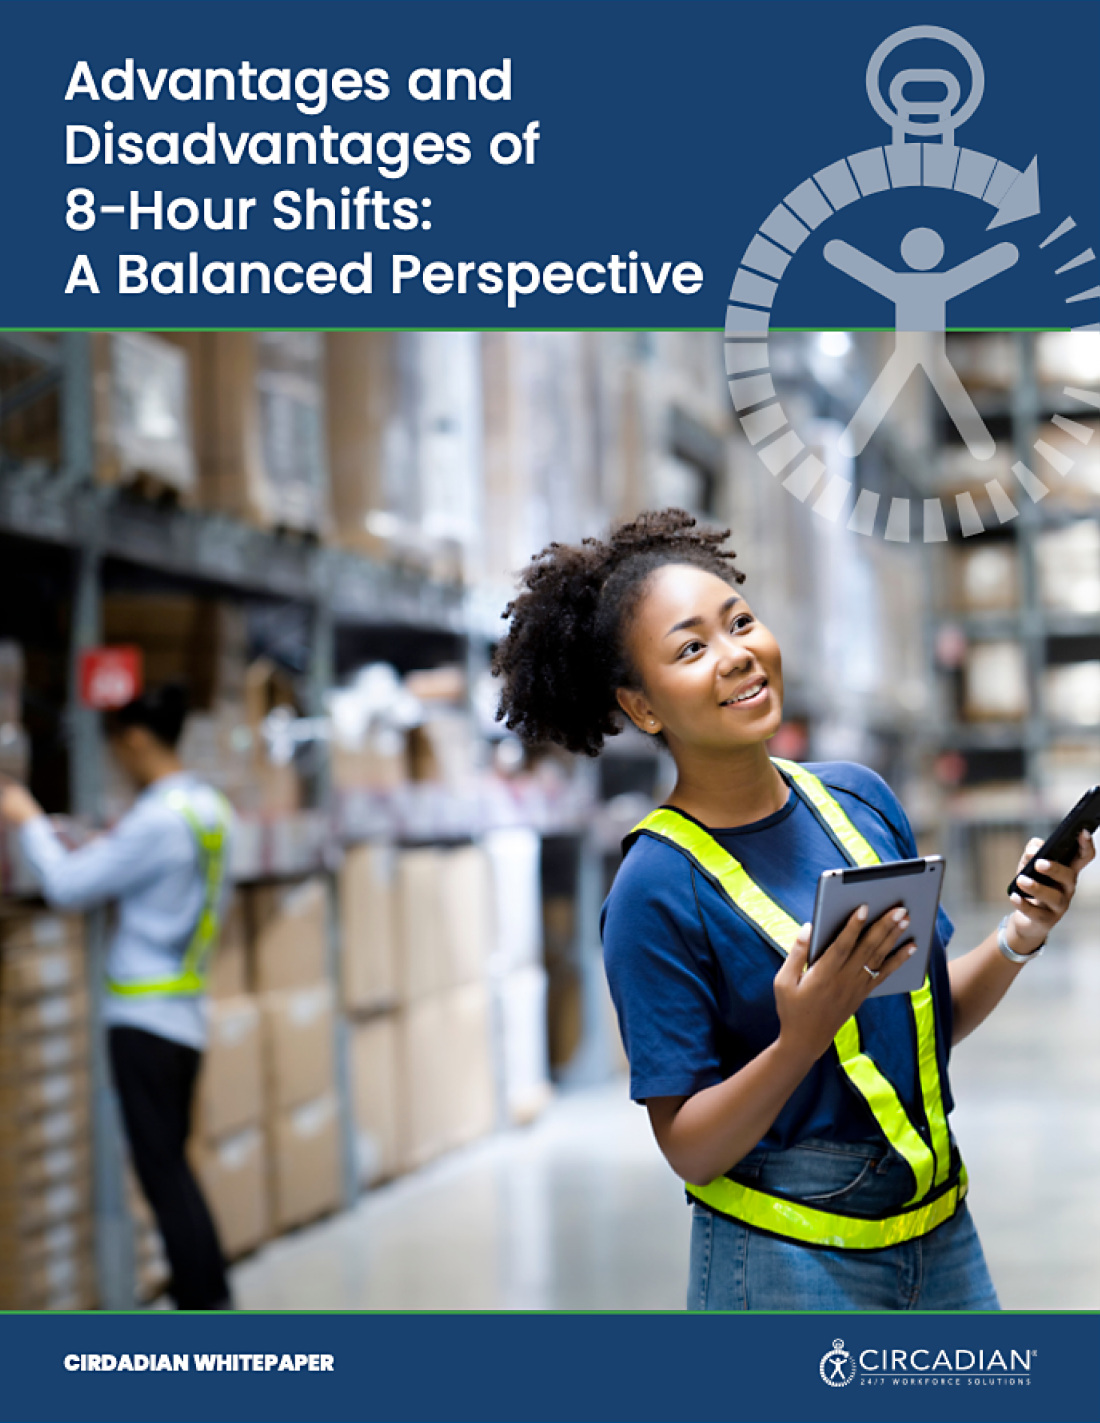 White Paper: Advantages and Disadvantages of 8-Hour Shifts